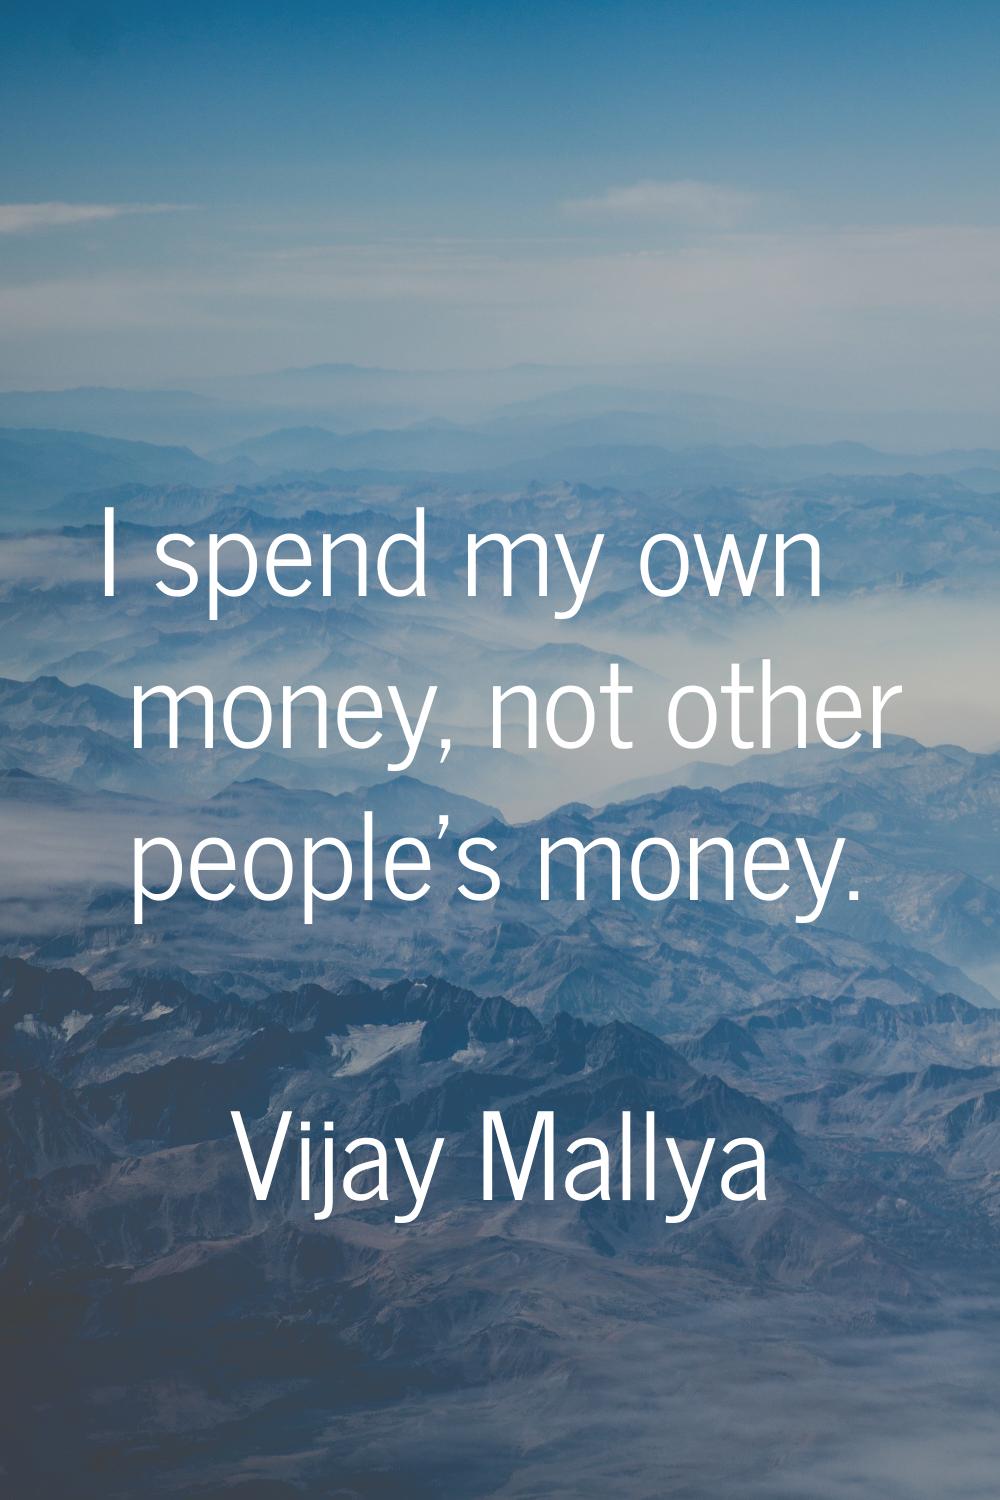 I spend my own money, not other people's money.